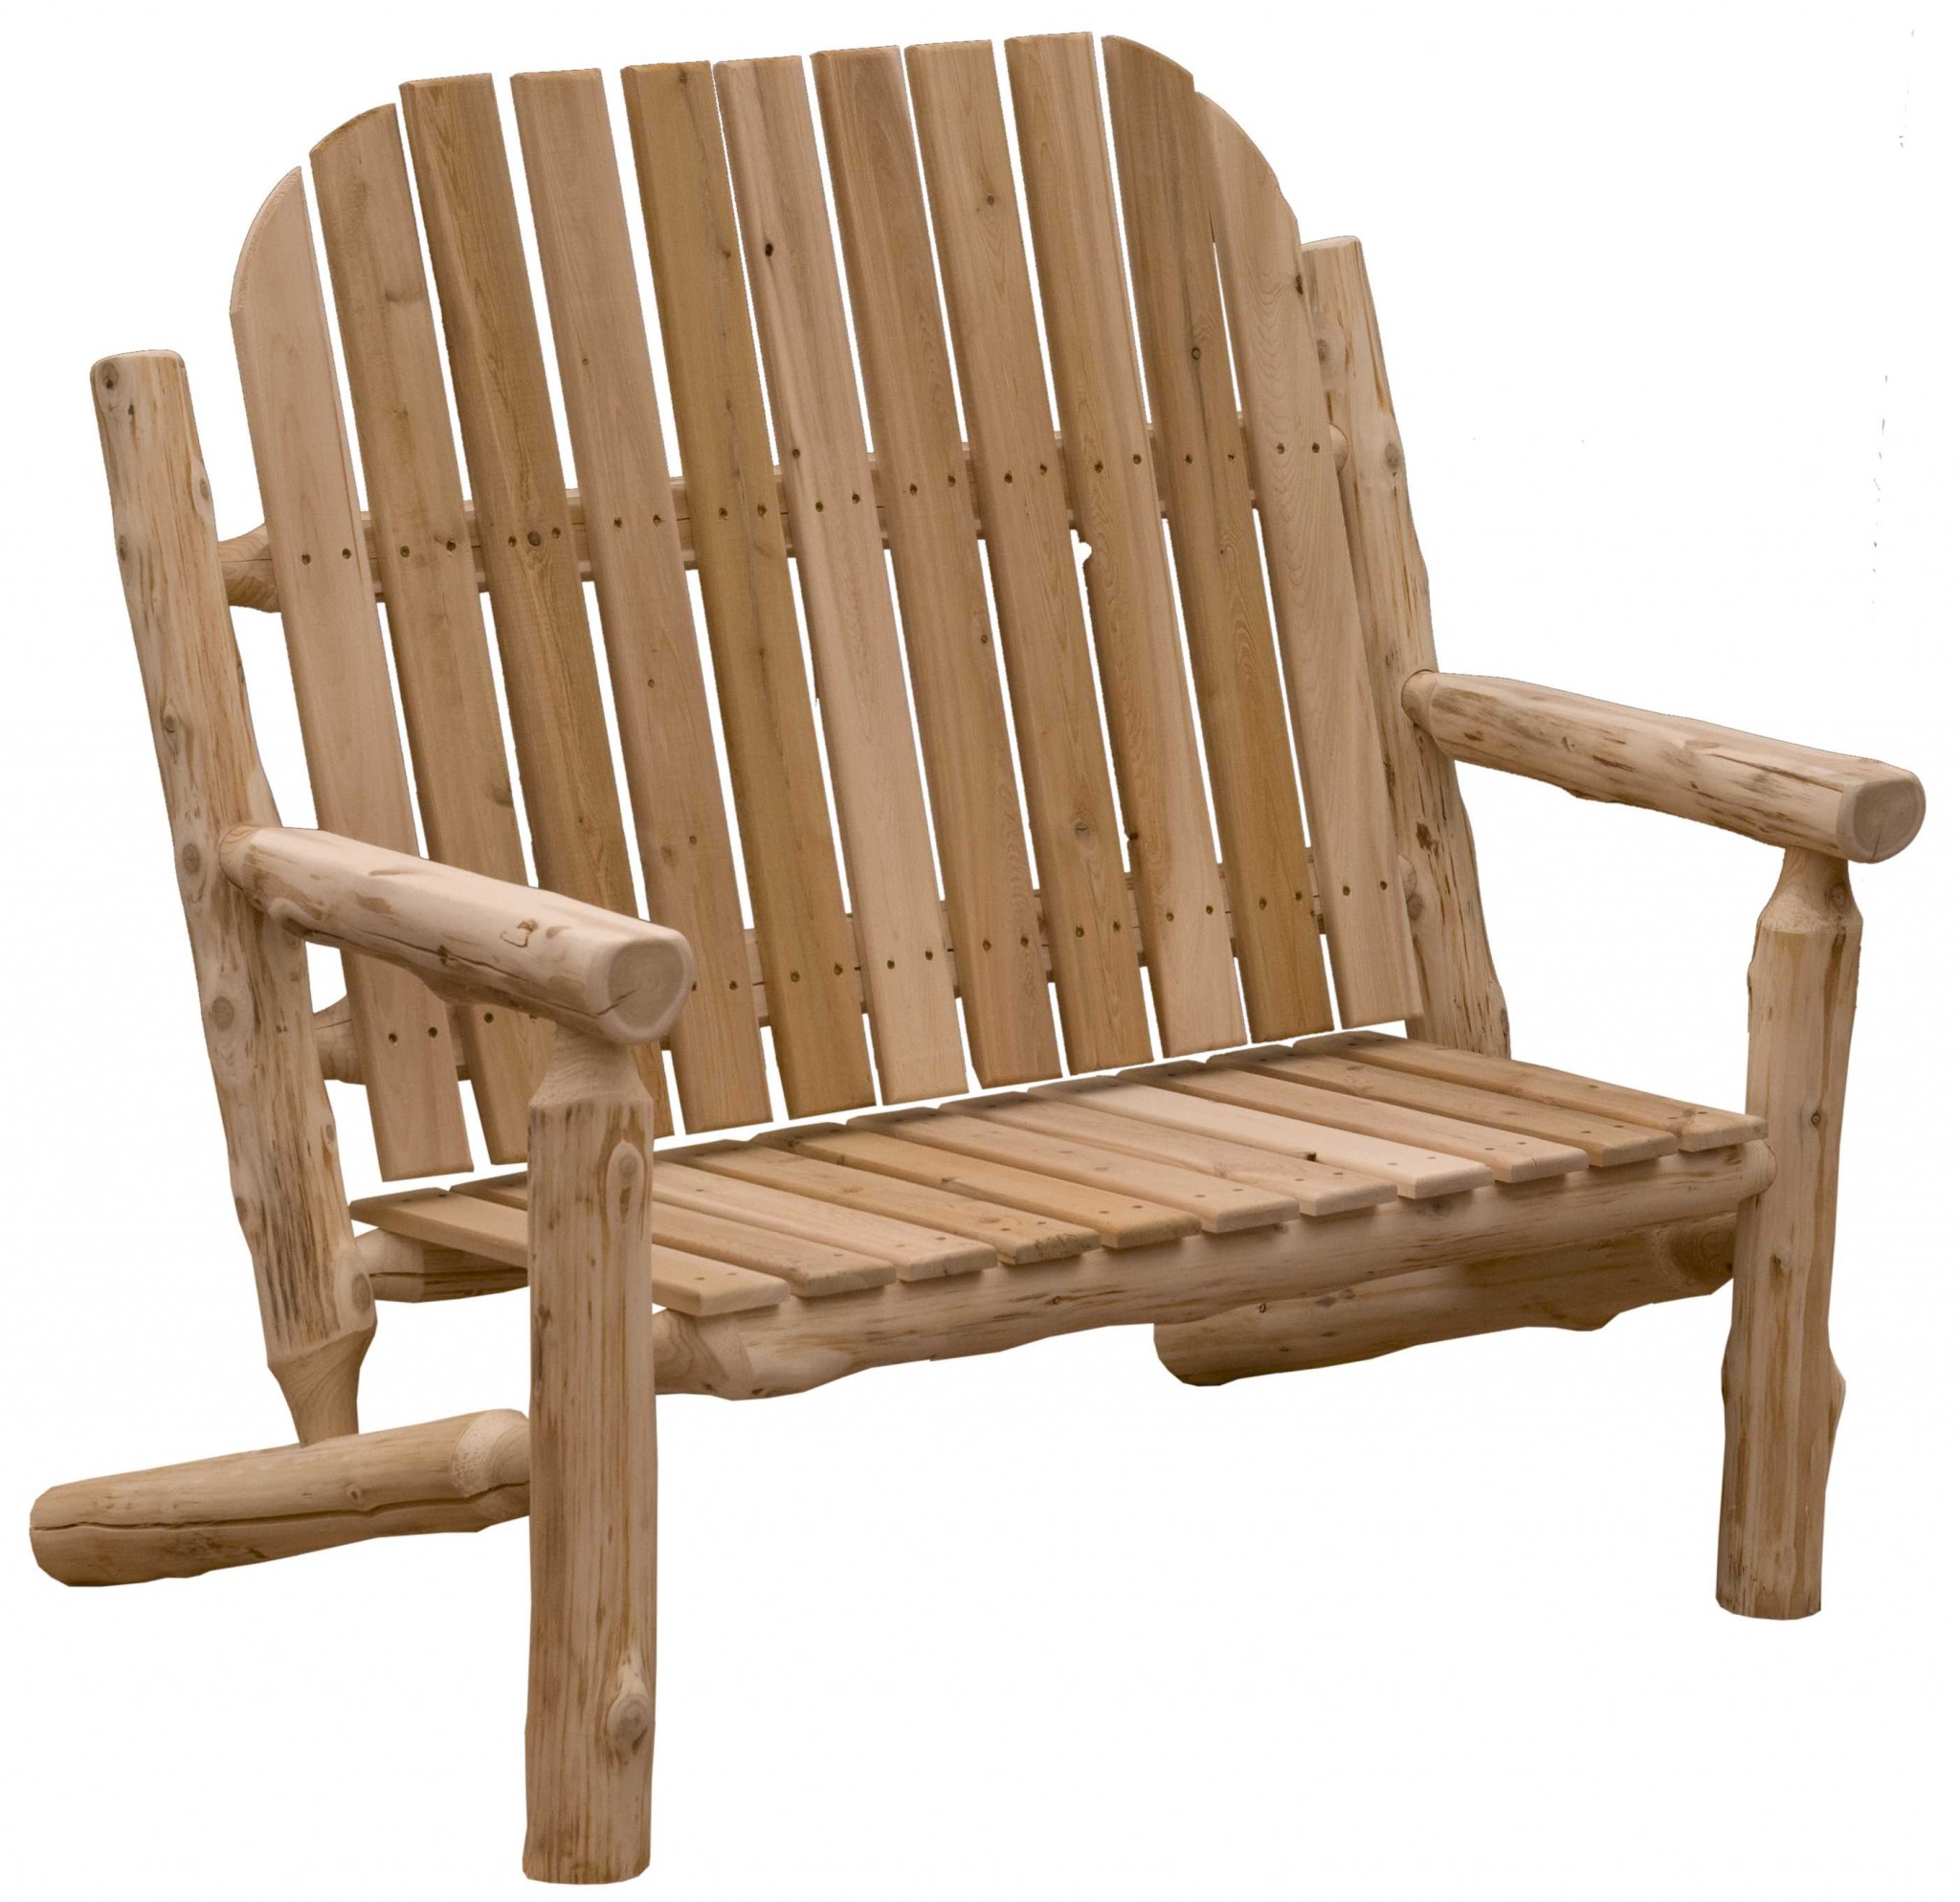 Rustic and Natural Cedar Two - Person Adirondack Chair